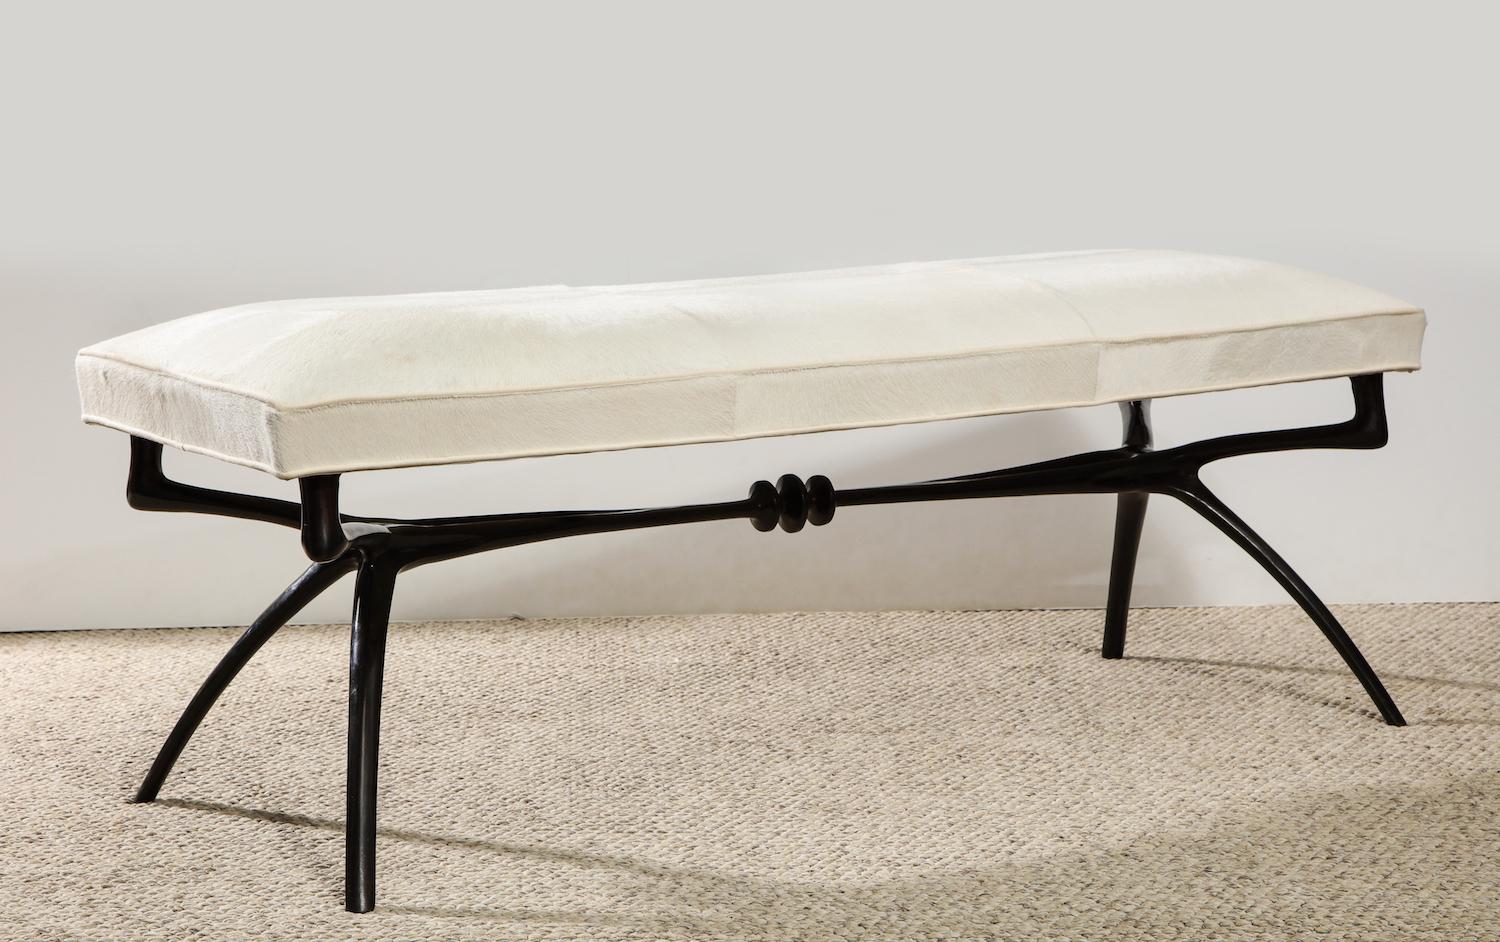 Made to order. Highly sculptural bench made out of cast bronze and upholstered with customer's own material. Please note that this bench comes in different sizes. Lead time: 20-24 weeks. C.O.M. Fabric: 2 yards. C.O.M. Leather: 1 hide. (1 hide = 55